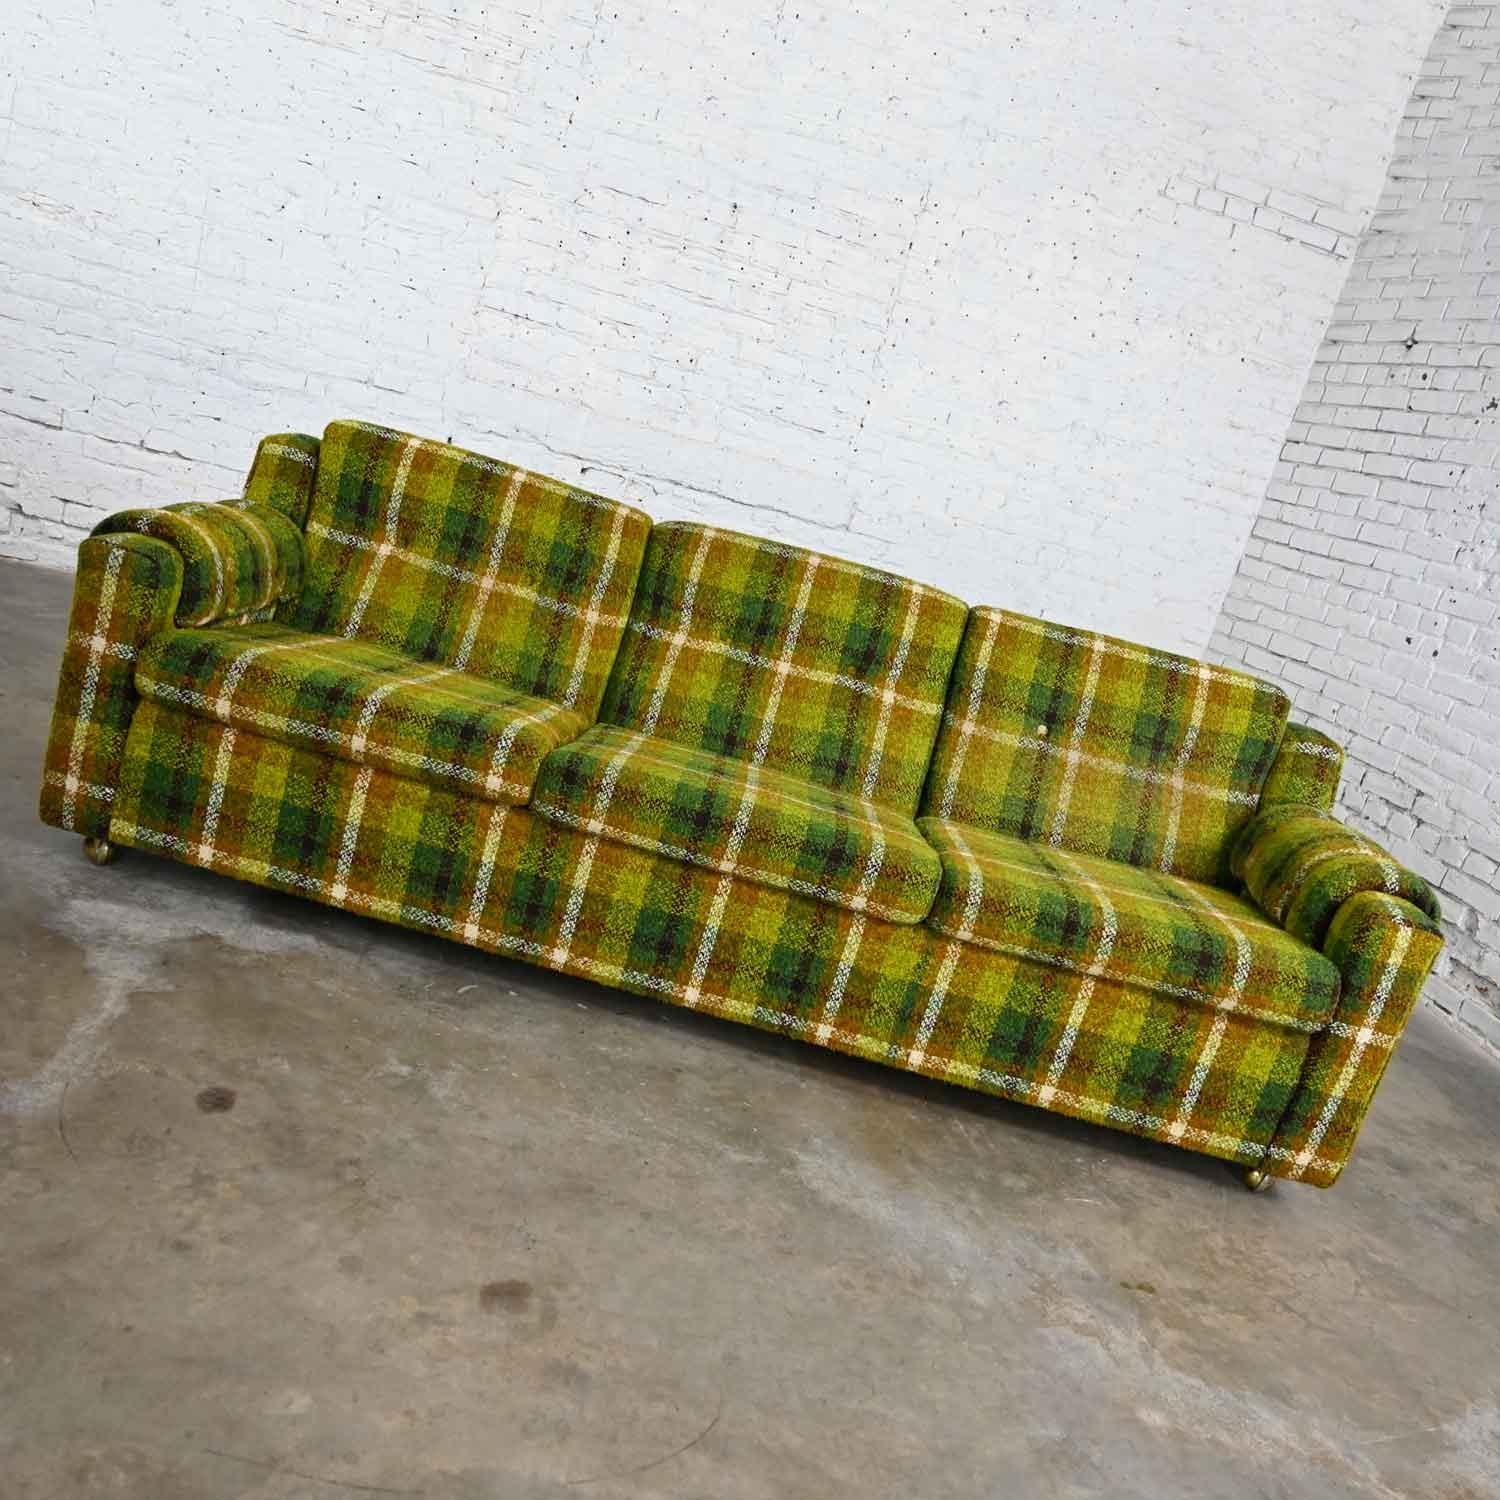 Handsome Mid-Century Modern green & gold plaid sofa by Mastercraft of Omaha. Beautiful condition, keeping in mind that this is vintage and not new so will have signs of use and wear. There is some wear, holes, & stains on the decking but all the